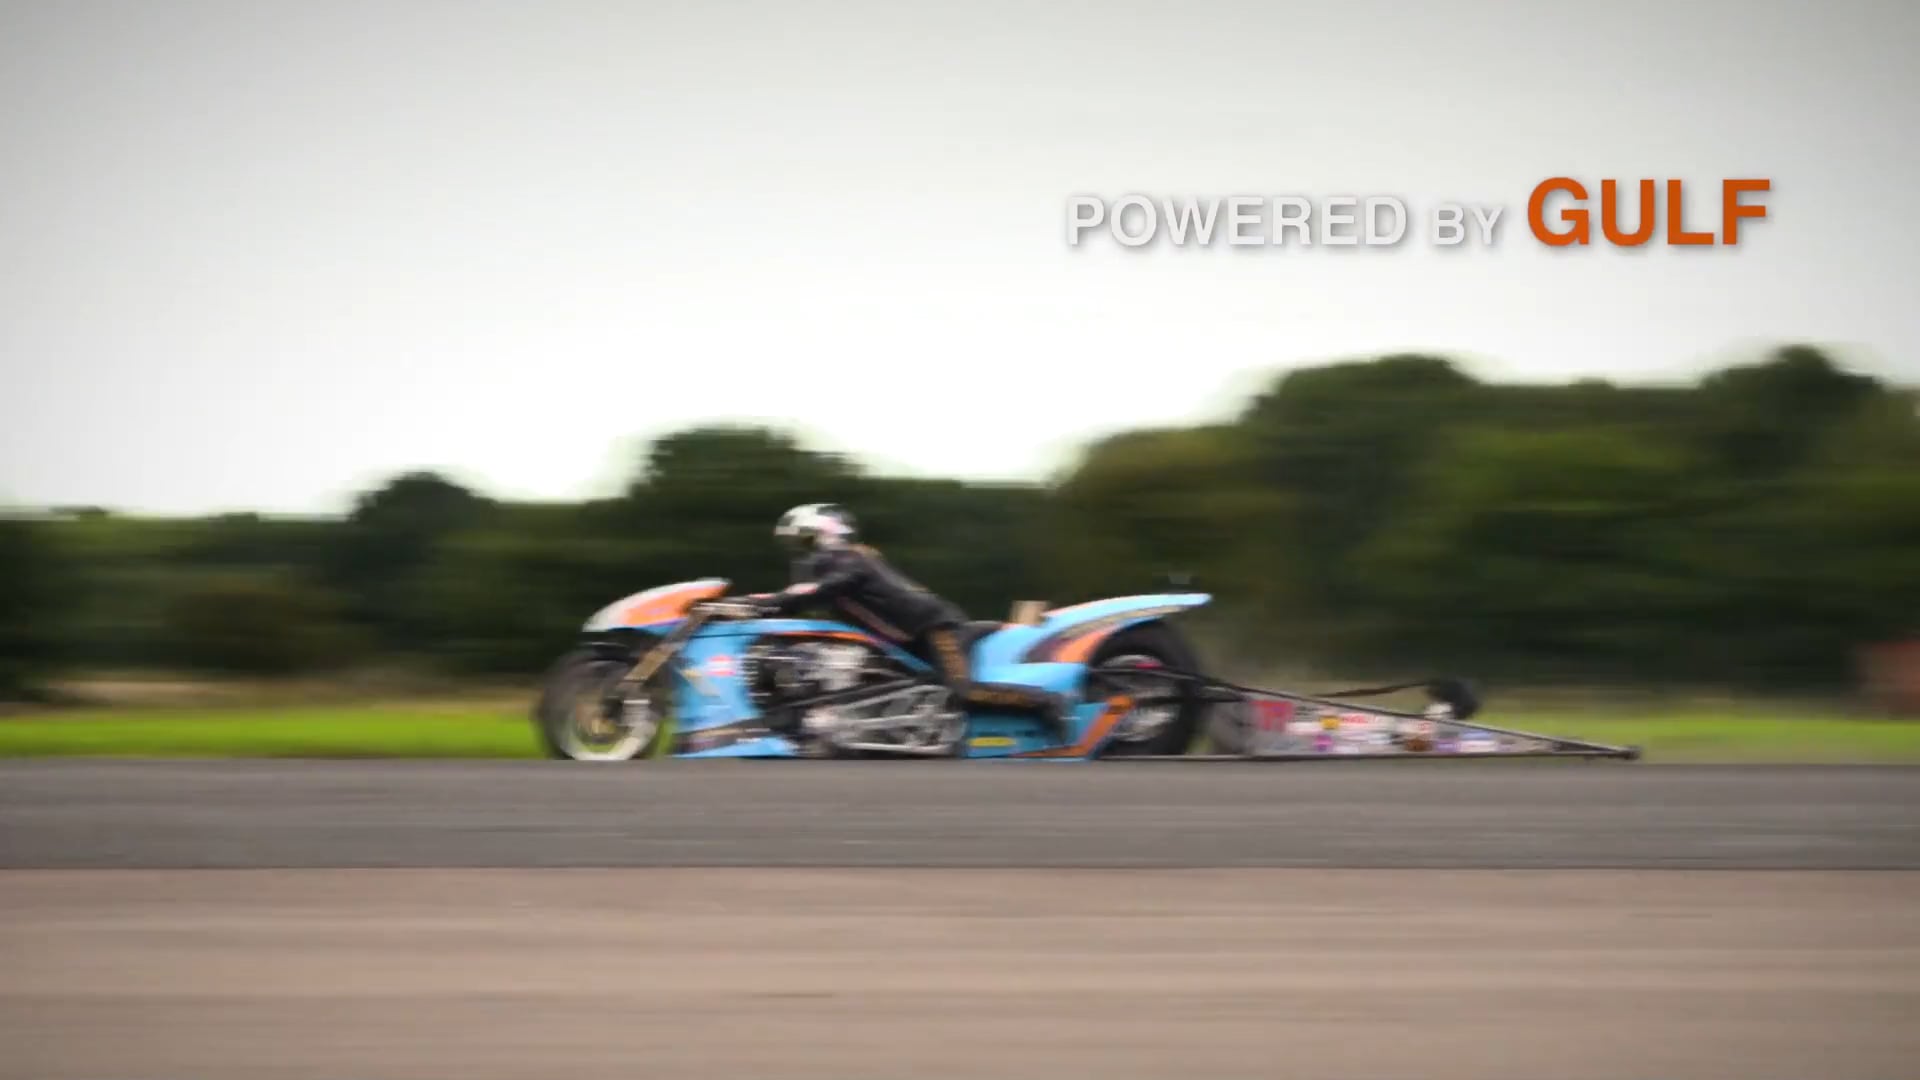 Gulf Oil Dragracing Land Speed Record Attempt  Point of Sale Feature